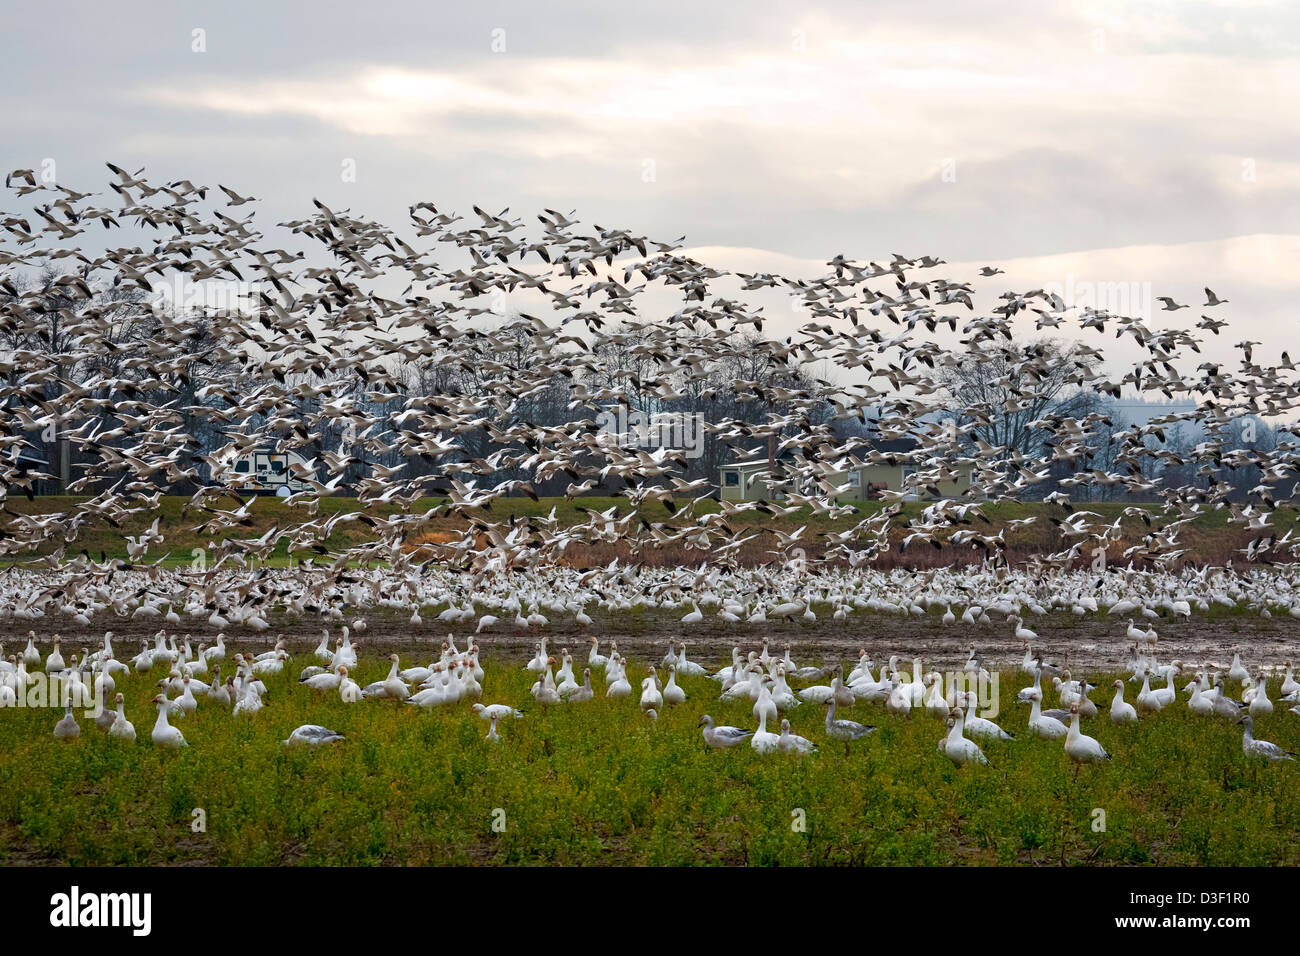 WA08133-00...WASHINGTON - A large of snow geese in a farm field on Fir Island in the Skagit River Delta. Stock Photo